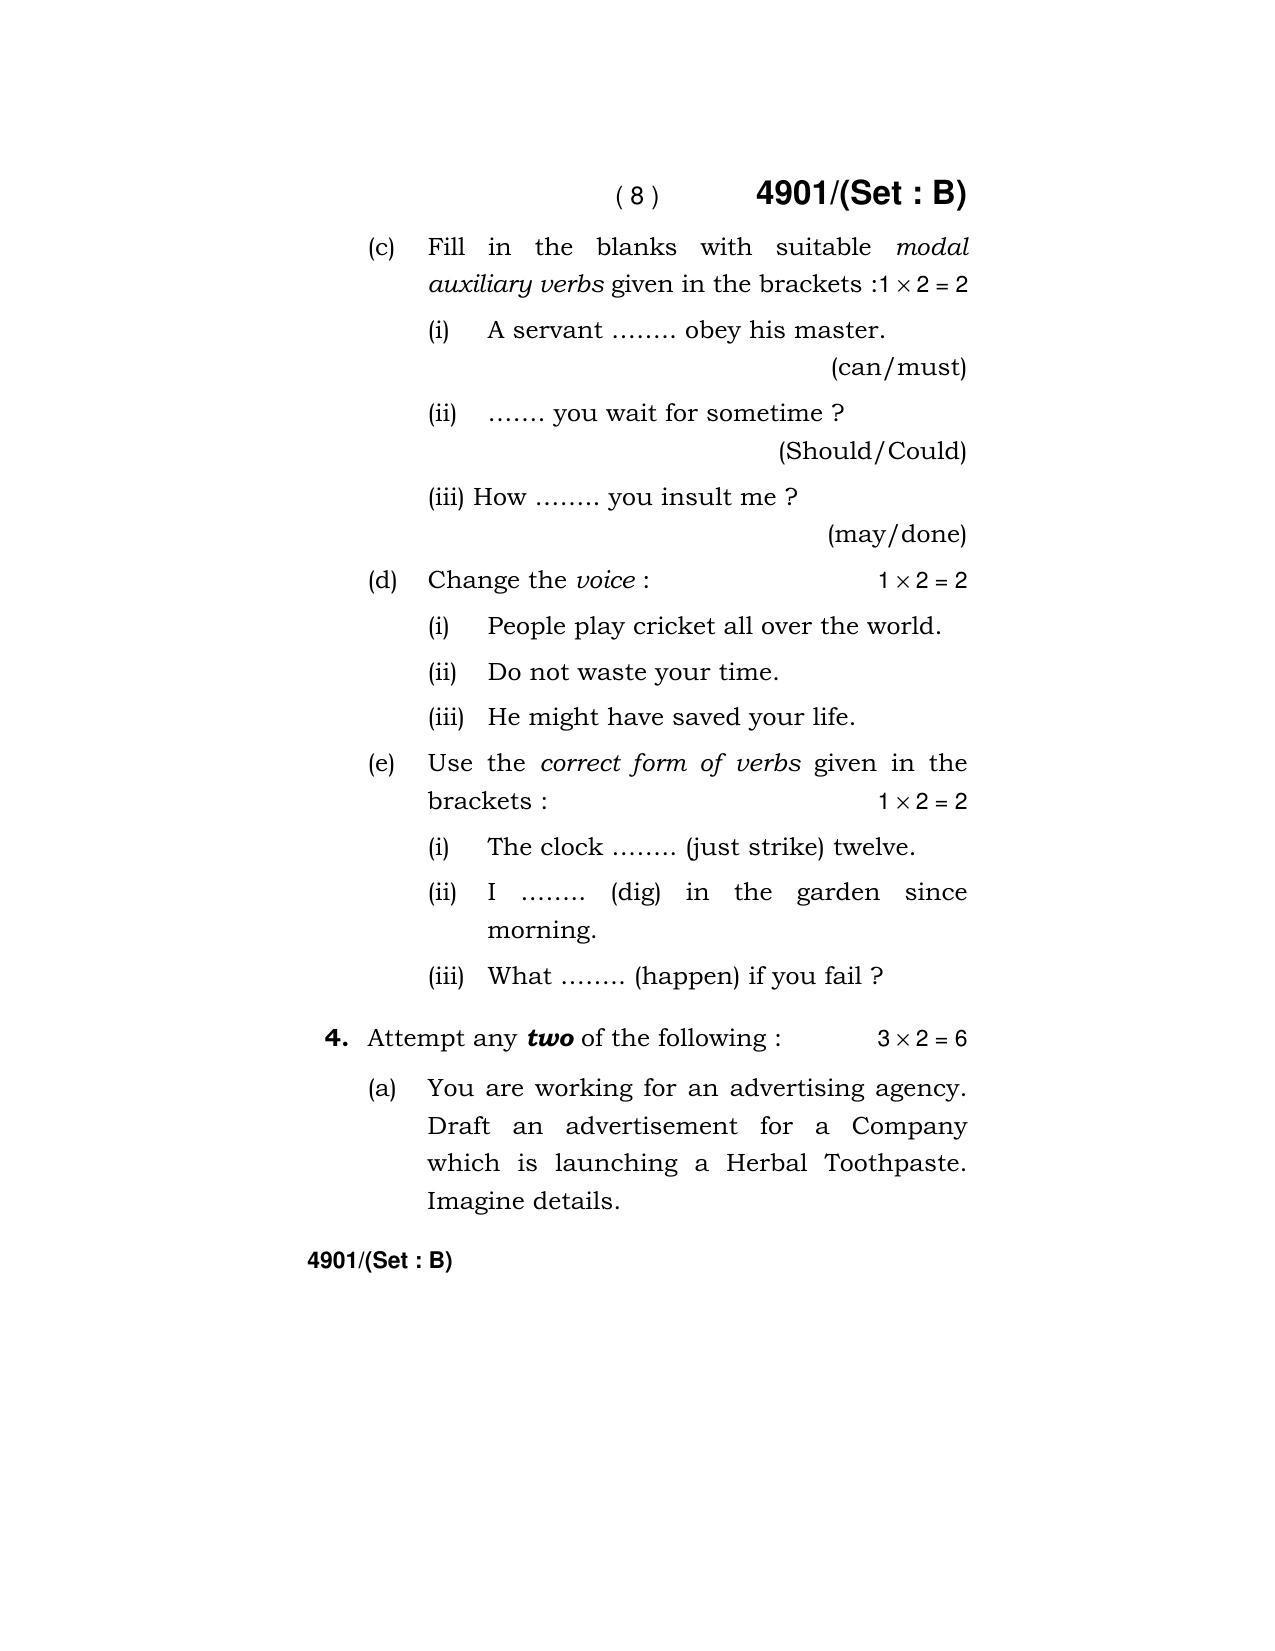 Haryana Board HBSE Class 12 English Core 2020 Question Paper - Page 24